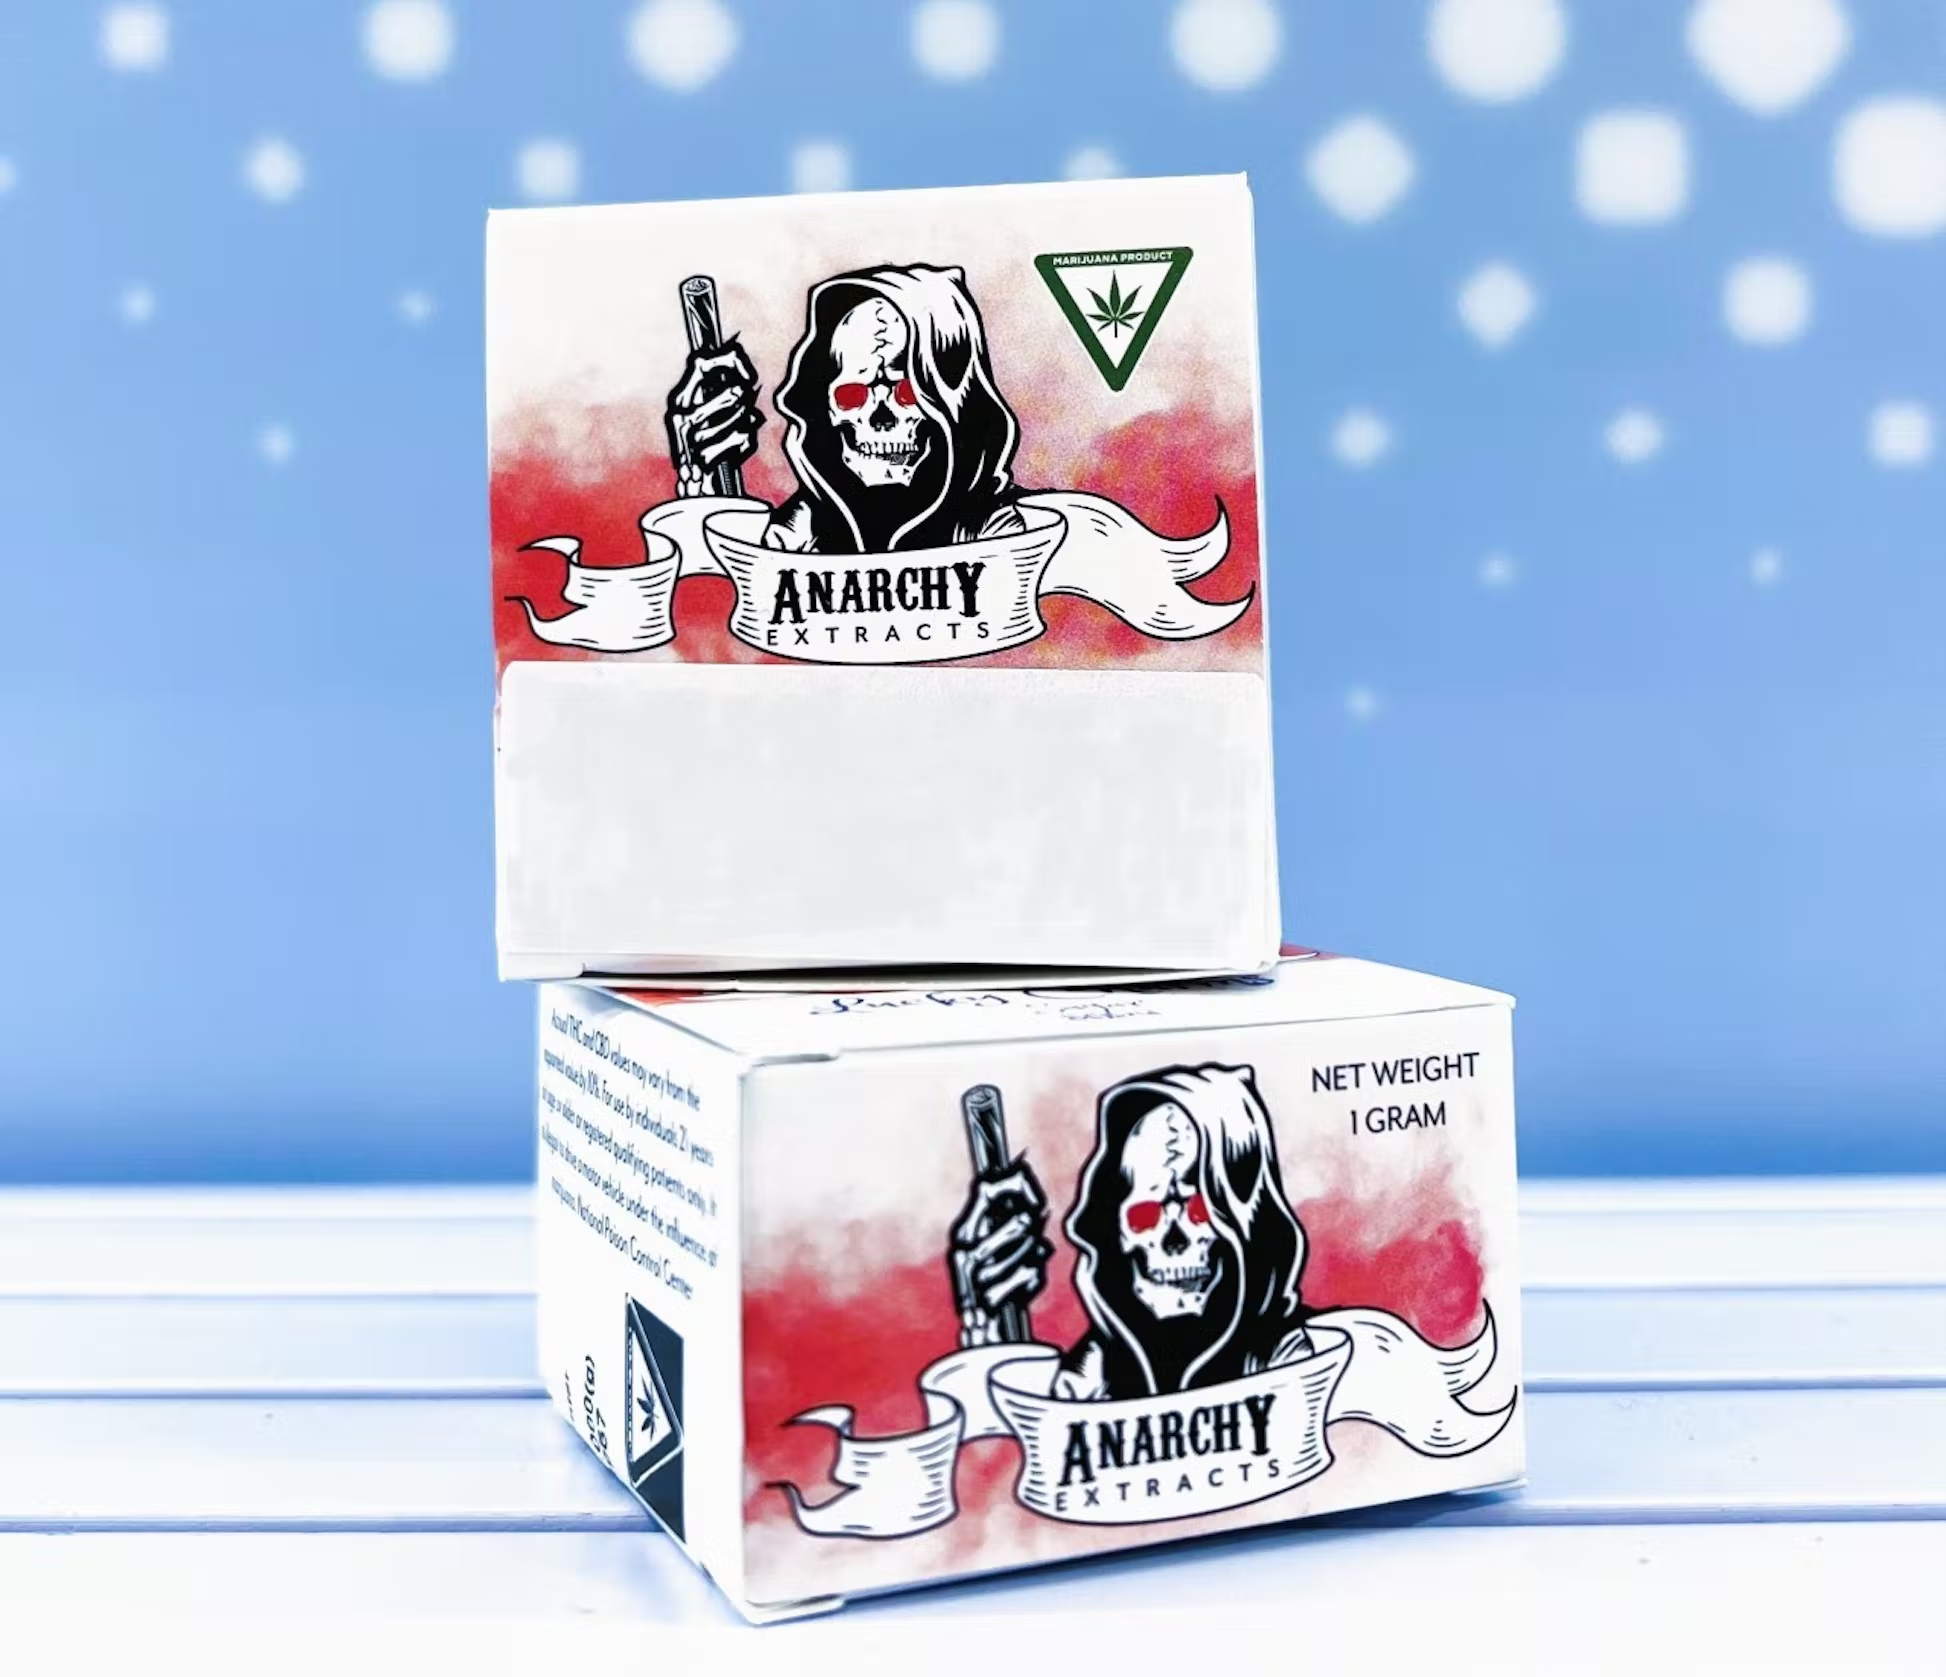 Anarchy Extracts Cannabis Brand Logo